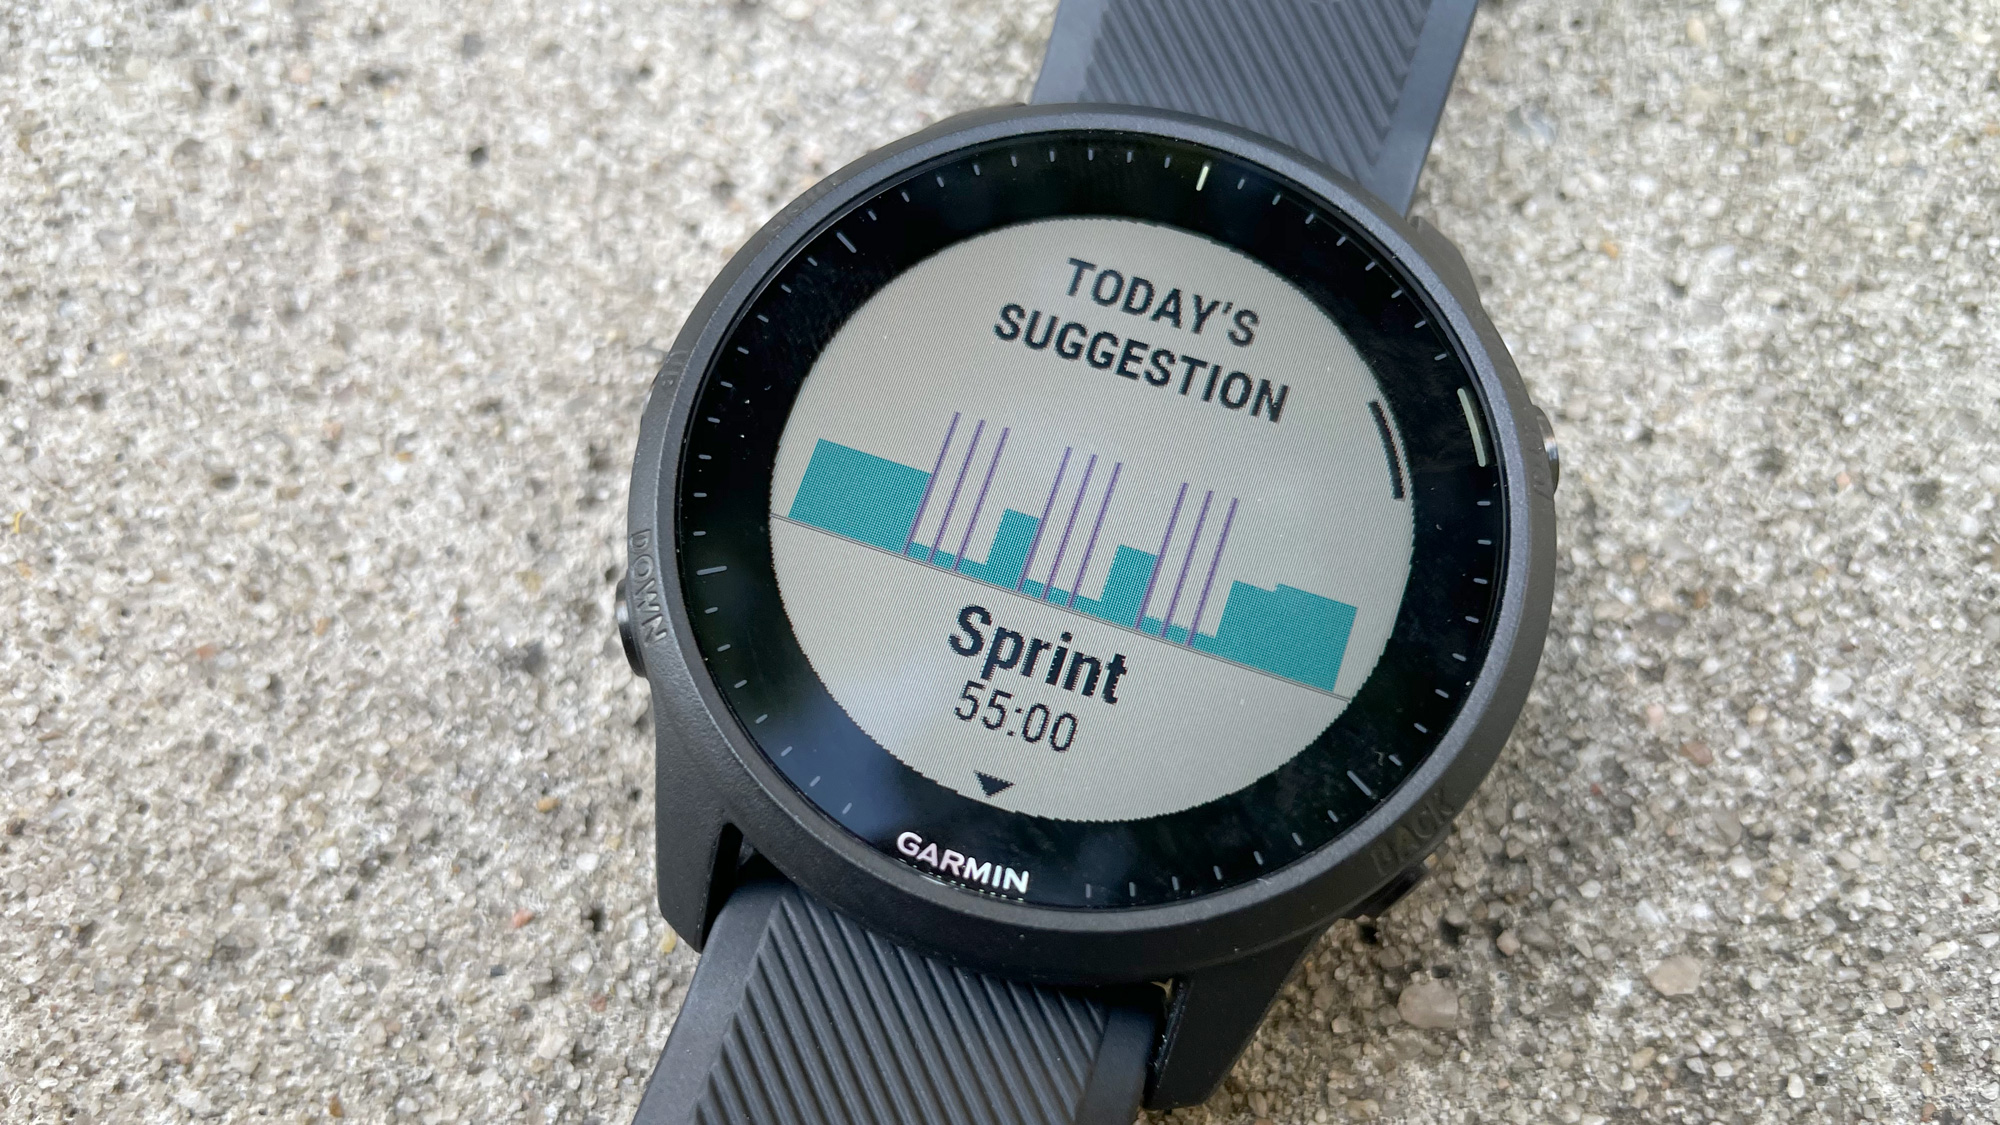 My Garmin watch has made me enjoy sprinting – and I hate myself for it